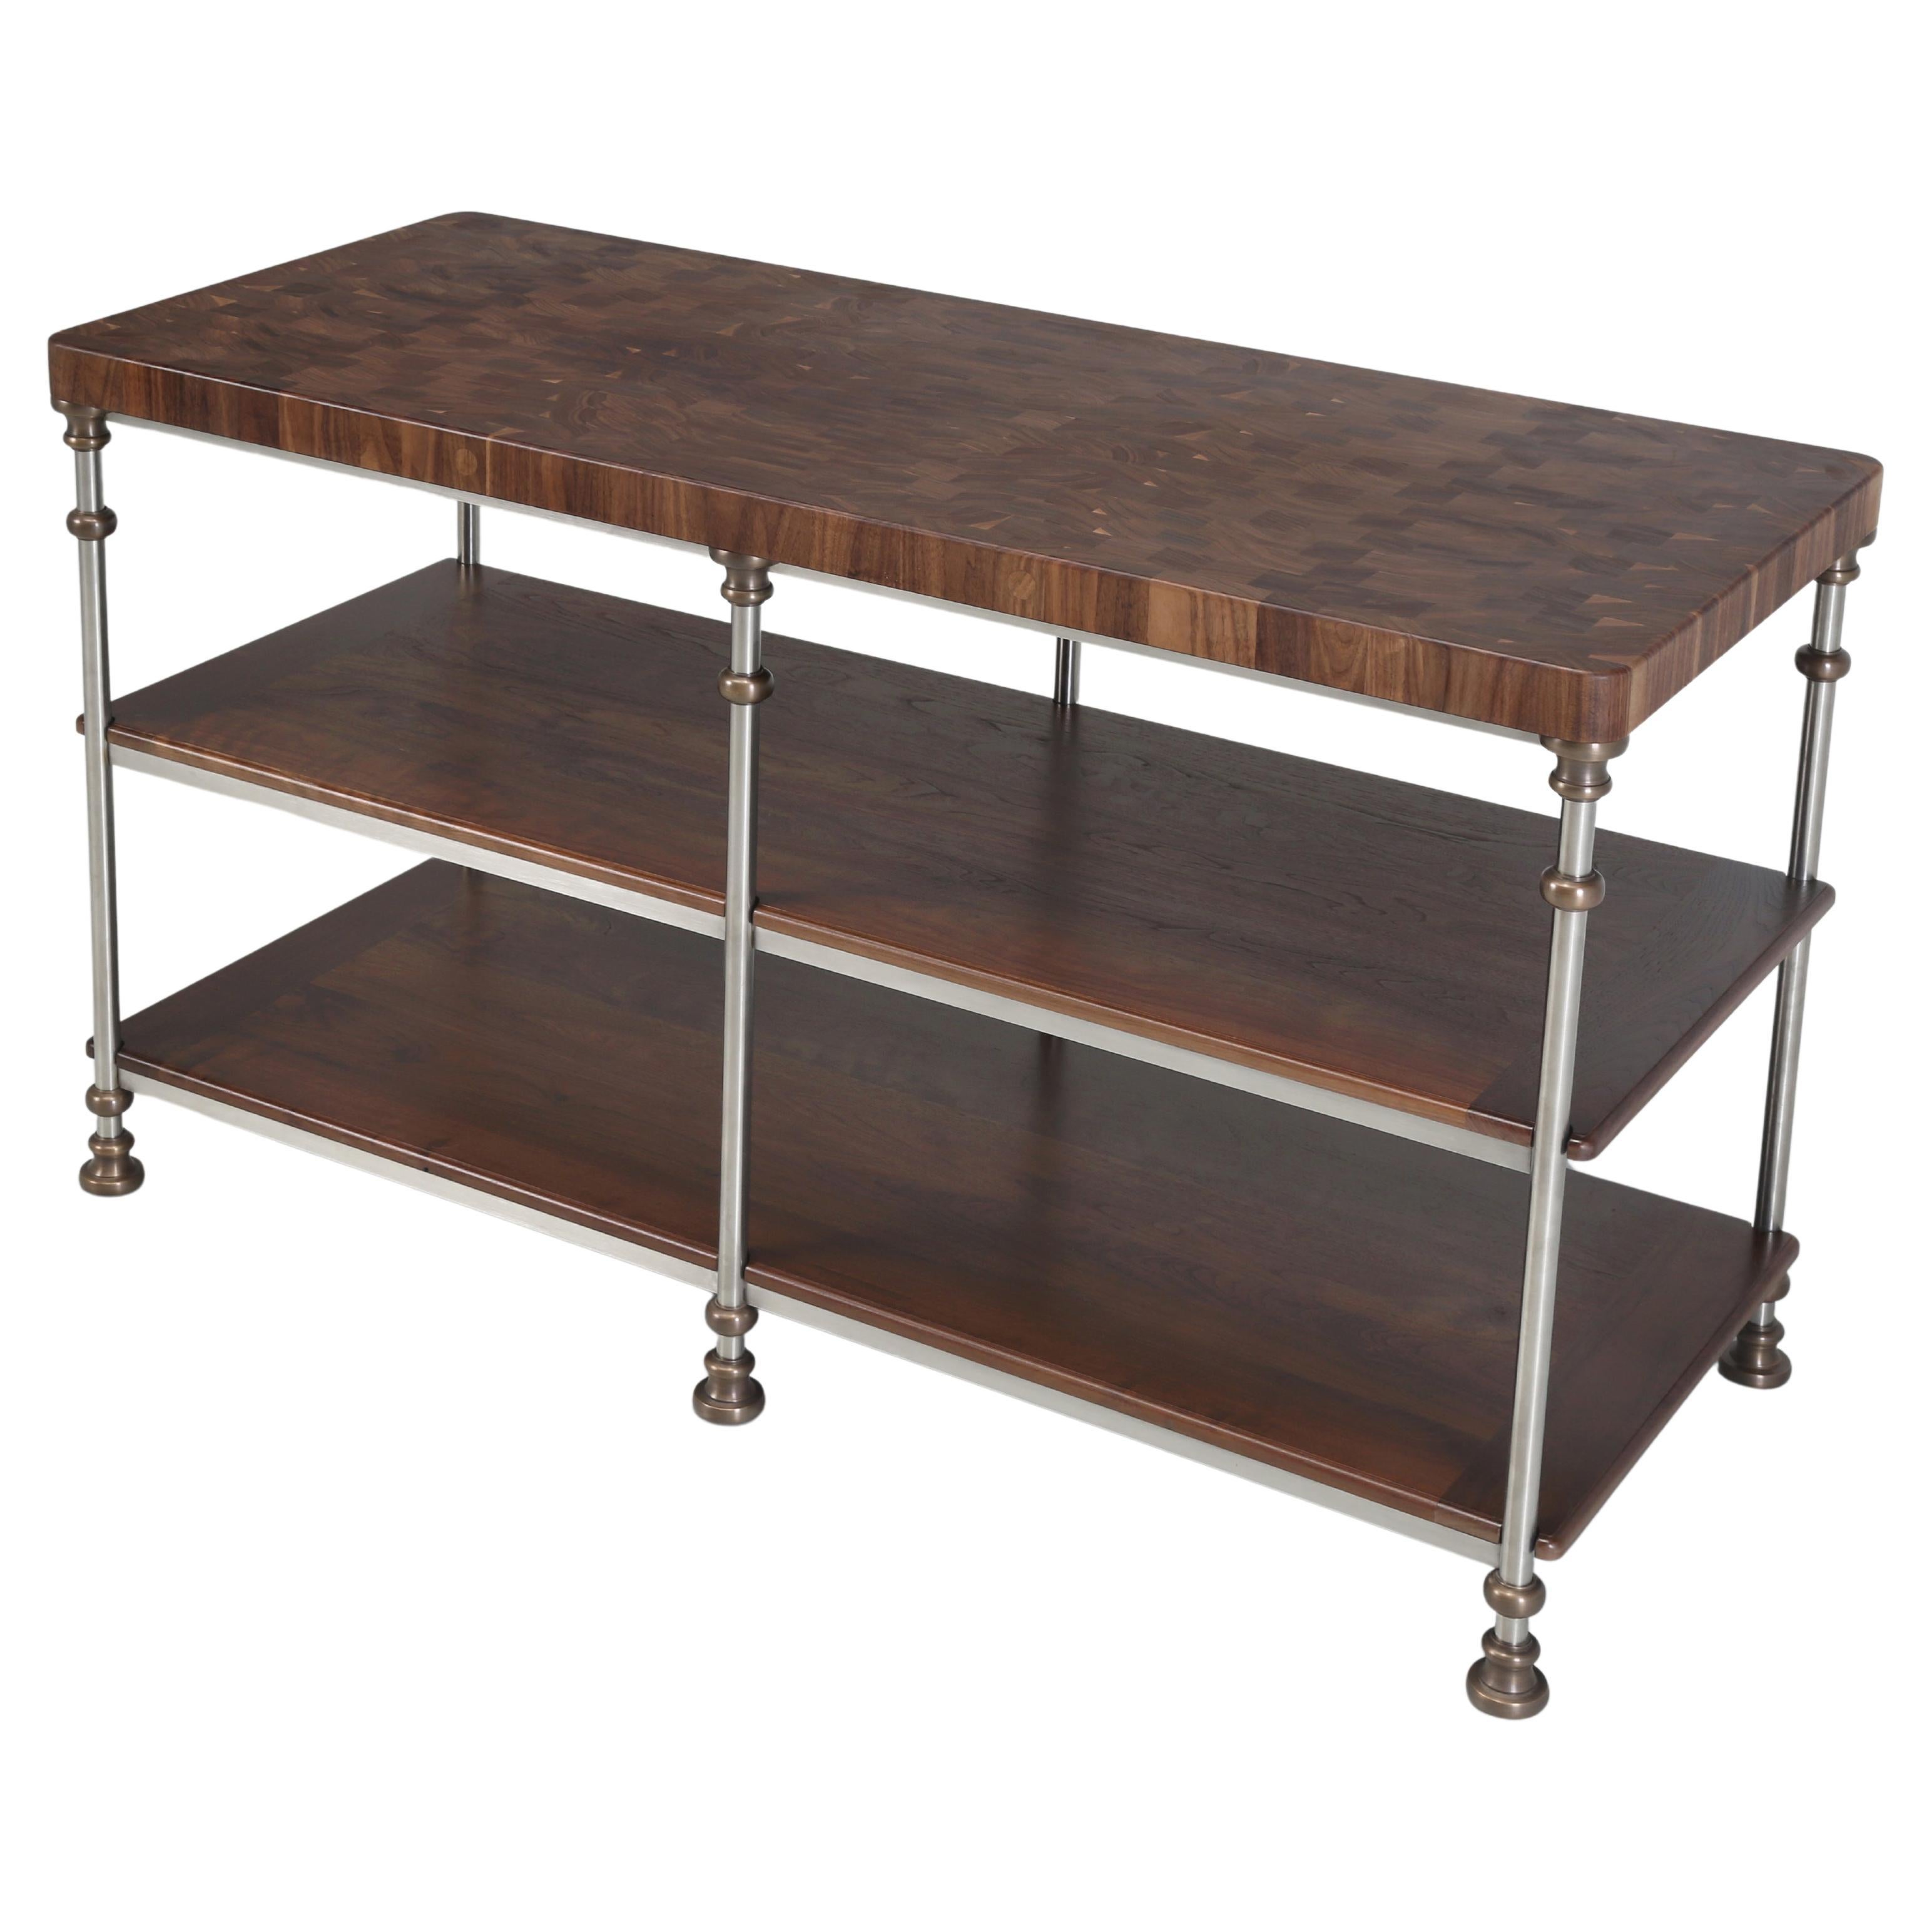  Kitchen Island Custom by Old Plank Spec Size and Numerous Material Options For Sale